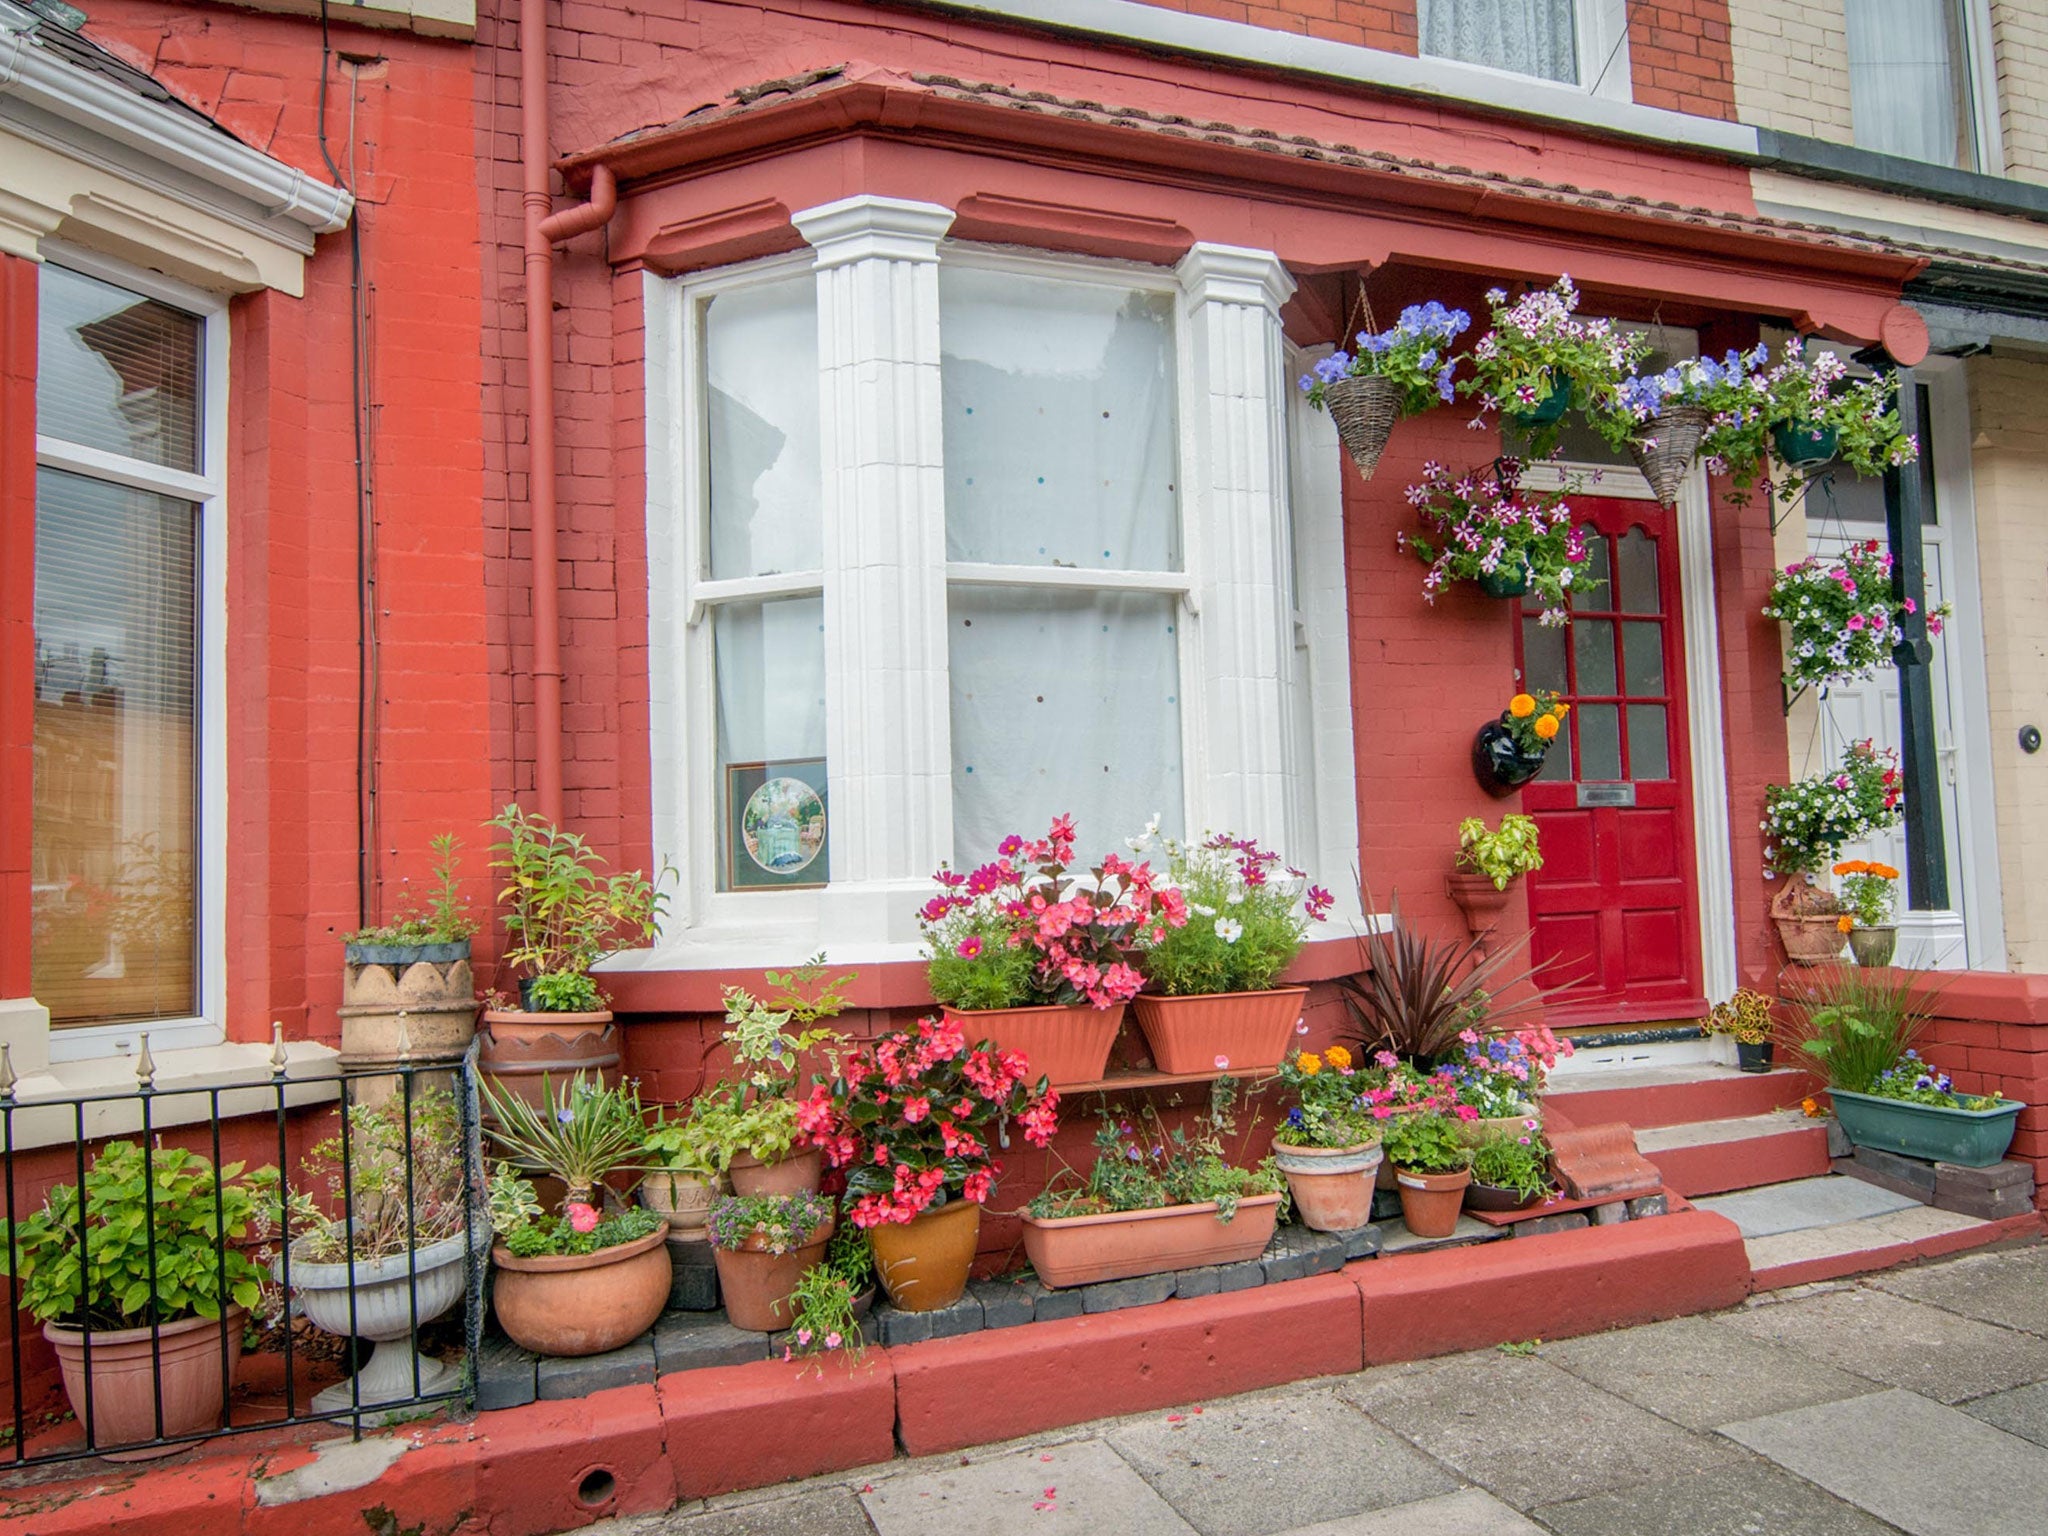 John Lennon's childhood home in Wavertree, Liverpool, has sold for £480,000